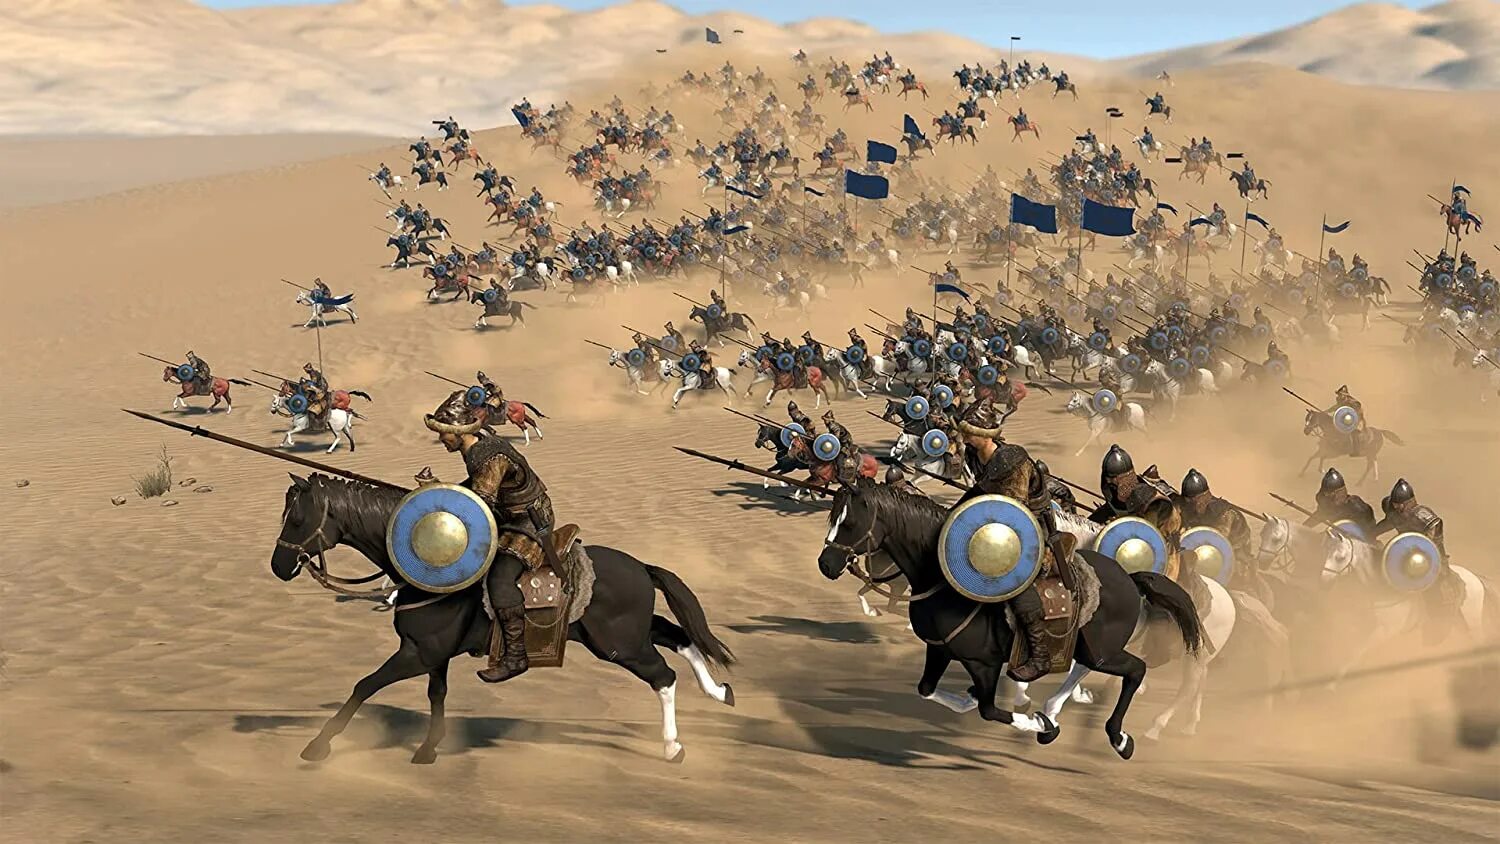 Mounted Blade 2. Mount & Blade. Monte Blade 2 Bannerlord. Warband bannerlord